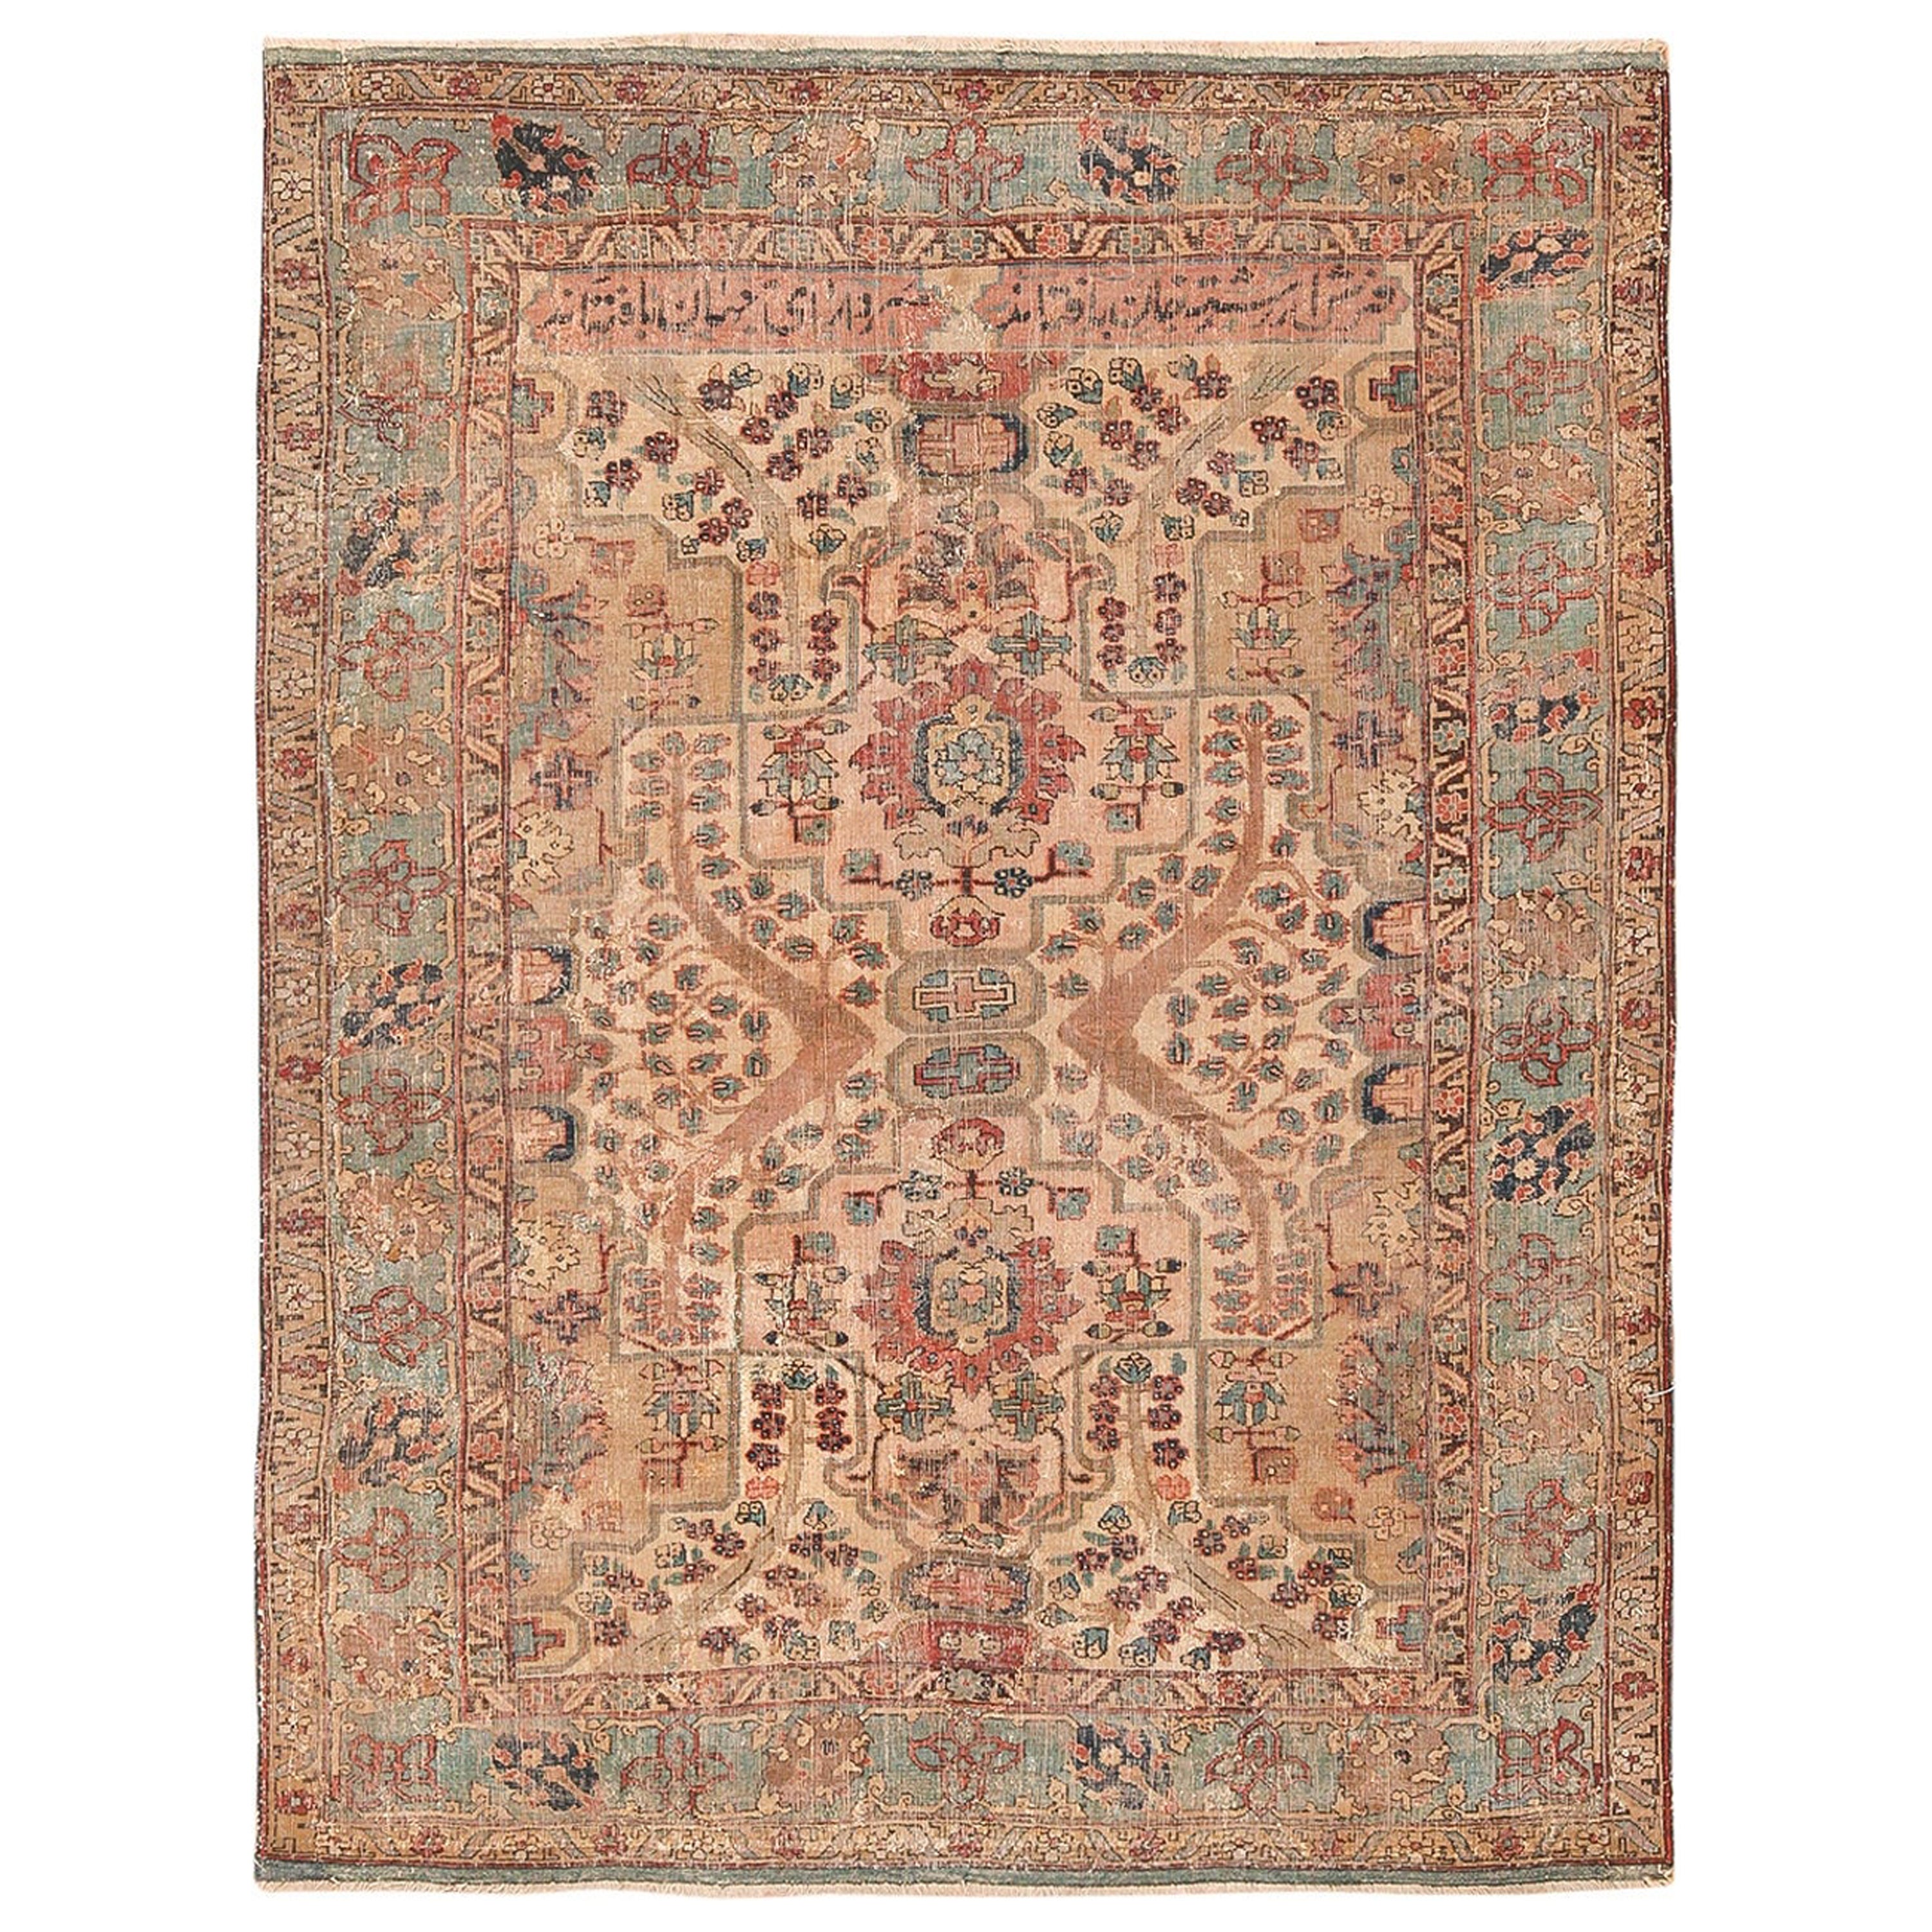 17th Century Small Size Persian Khorassan Rug. 4 ft 5 in x 5 ft 9 in